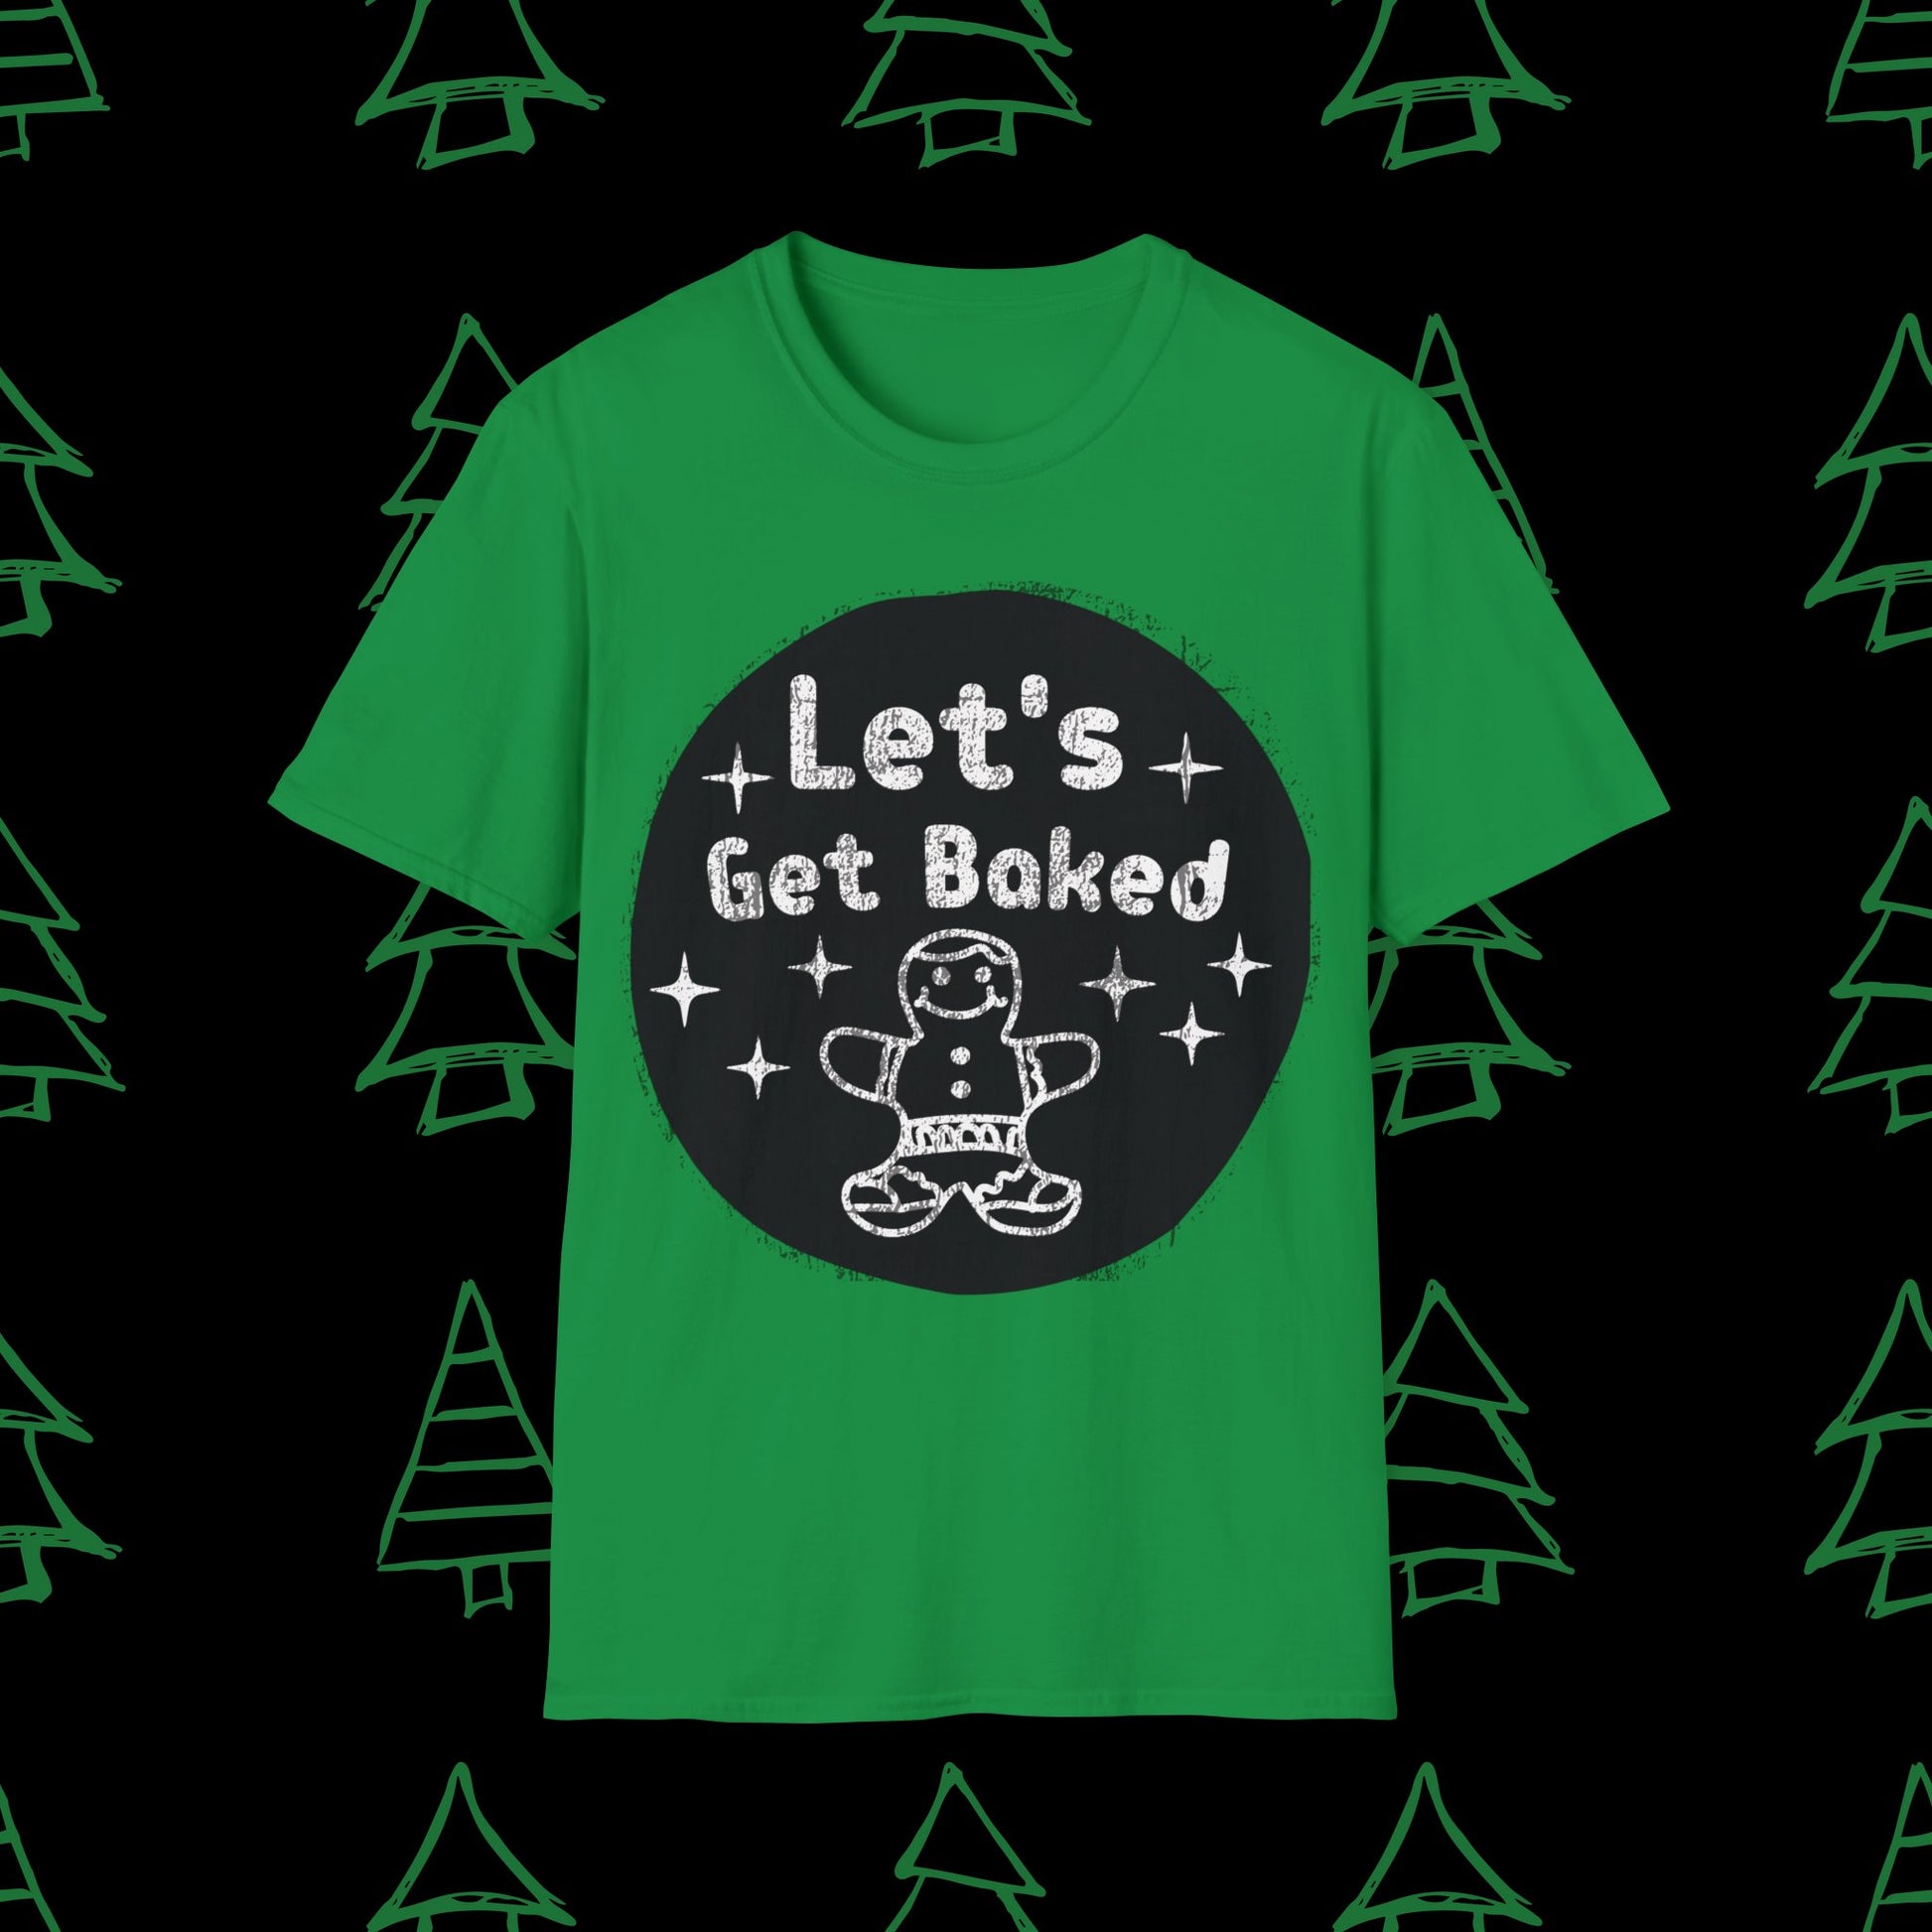 Christmas T-Shirt - Let's Get Baked - Mens Christmas Shirts - Adult Christmas TShirts T-Shirts Graphic Avenue Irish Green Adult Small 